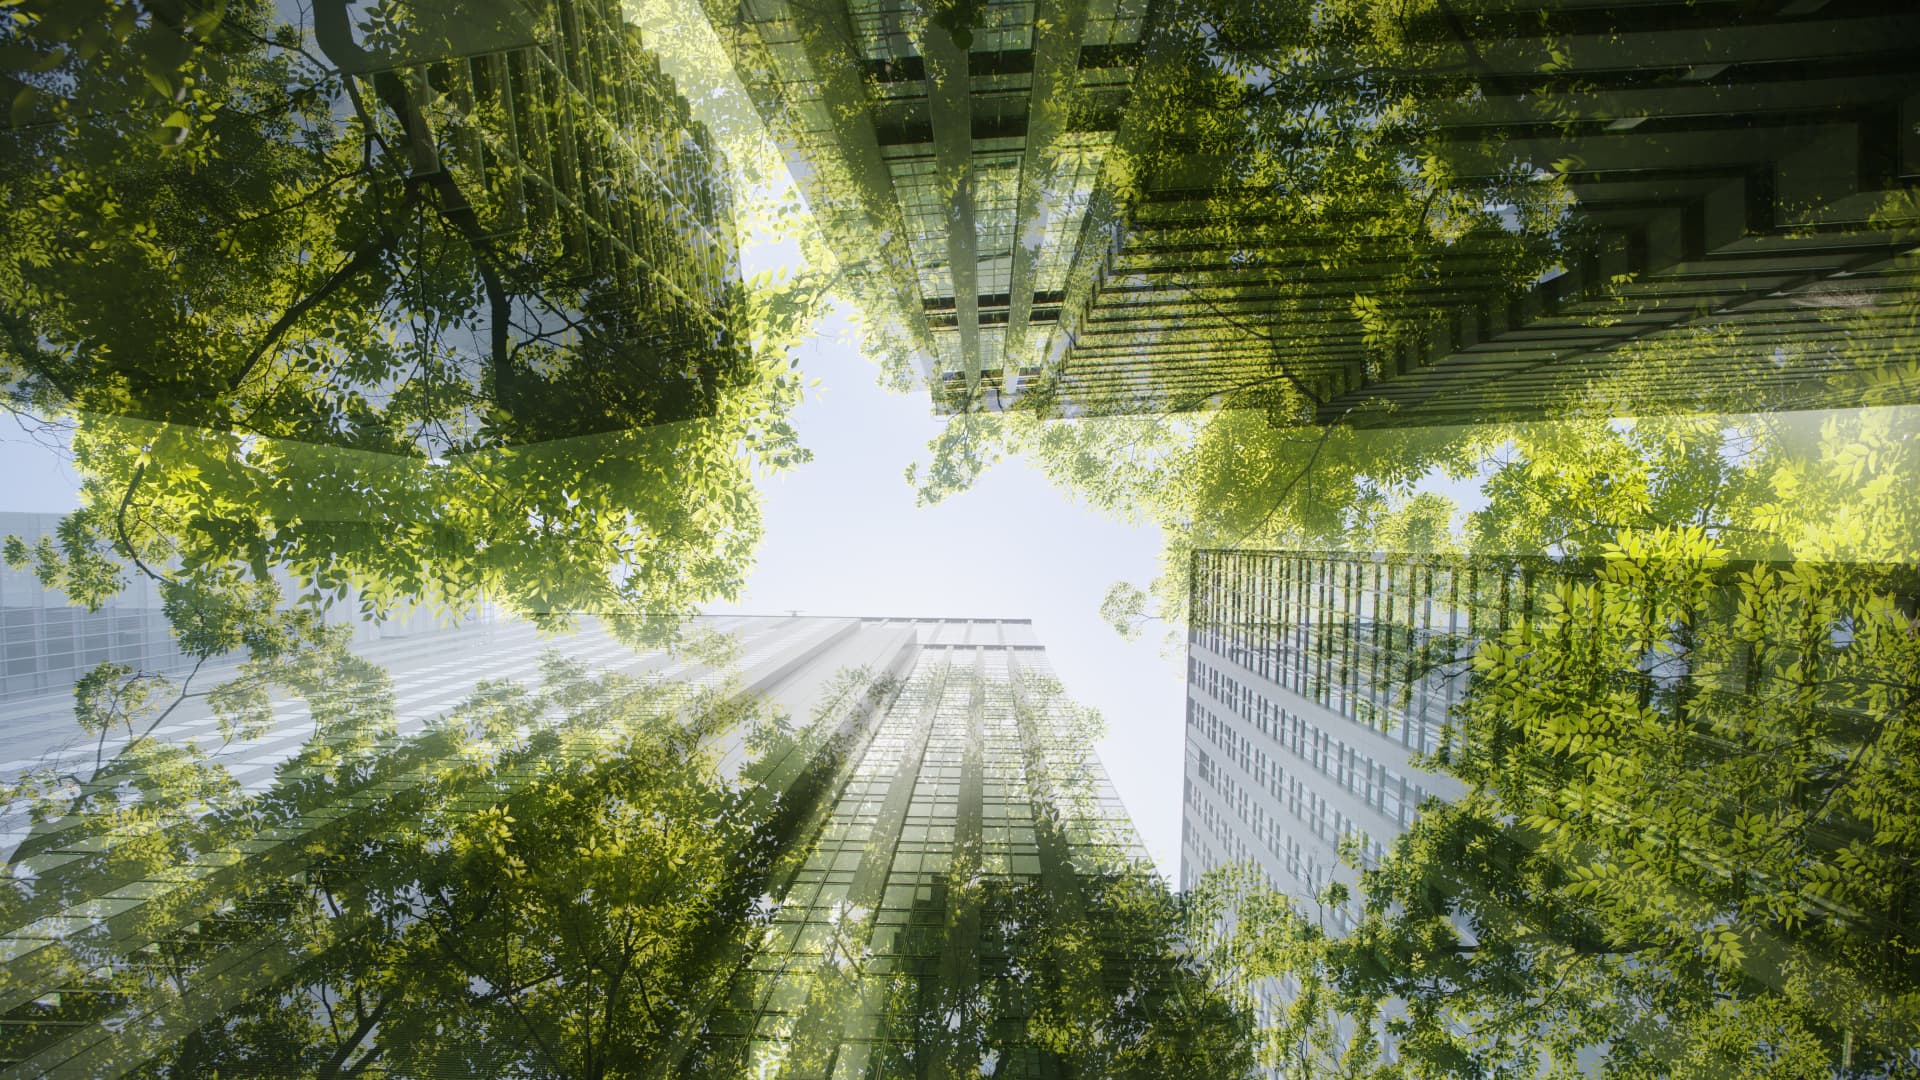 London's 'green' offices are expensive. But they may help retain workers